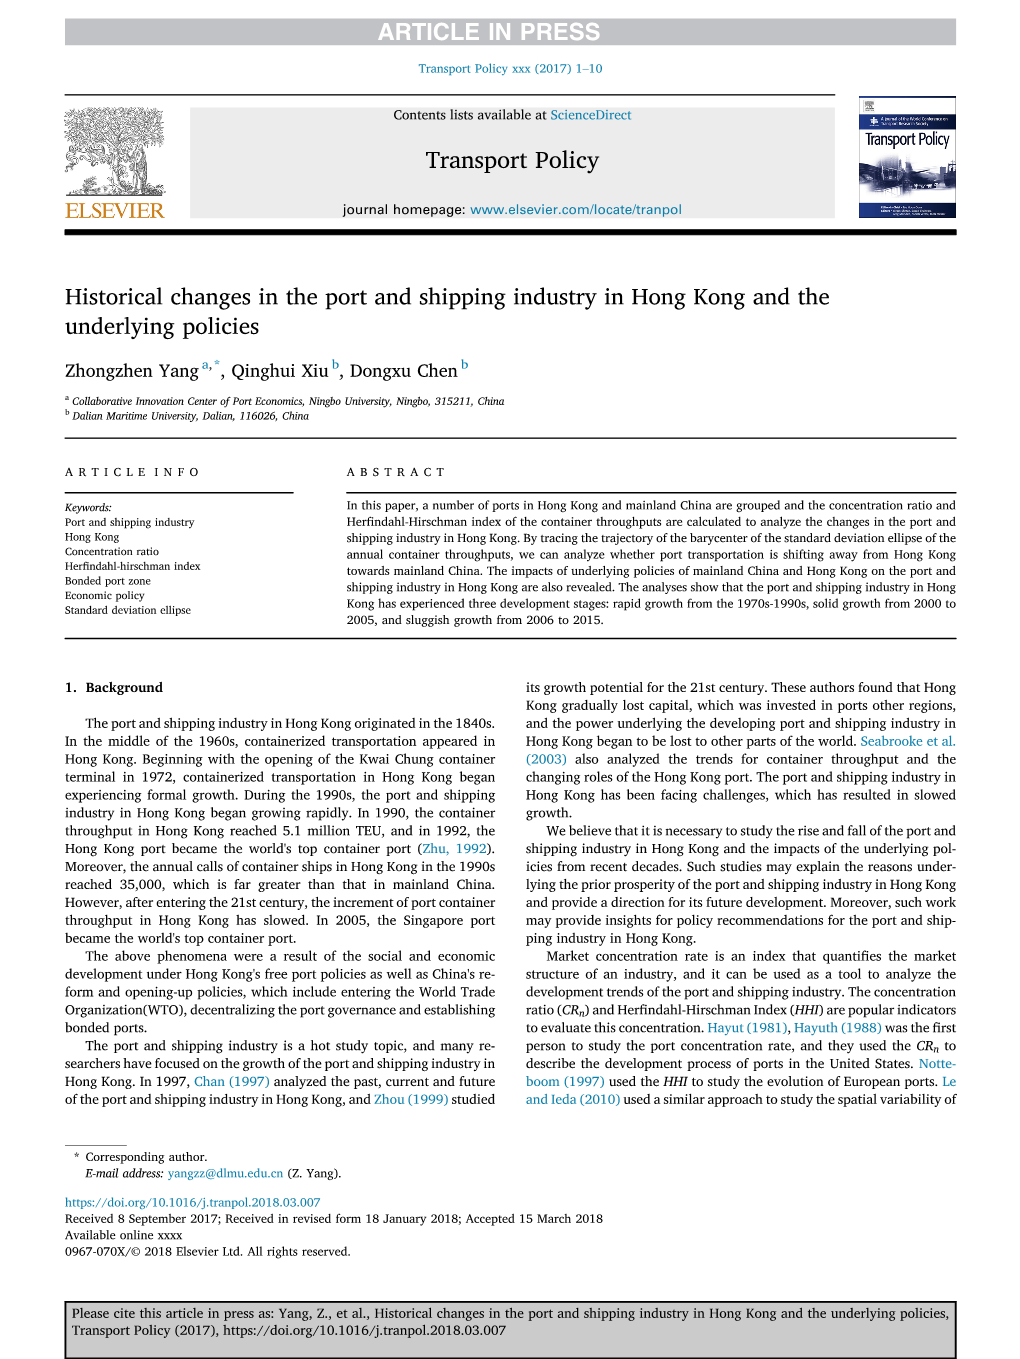 Historical Changes in the Port and Shipping Industry in Hong Kong and the Underlying Policies